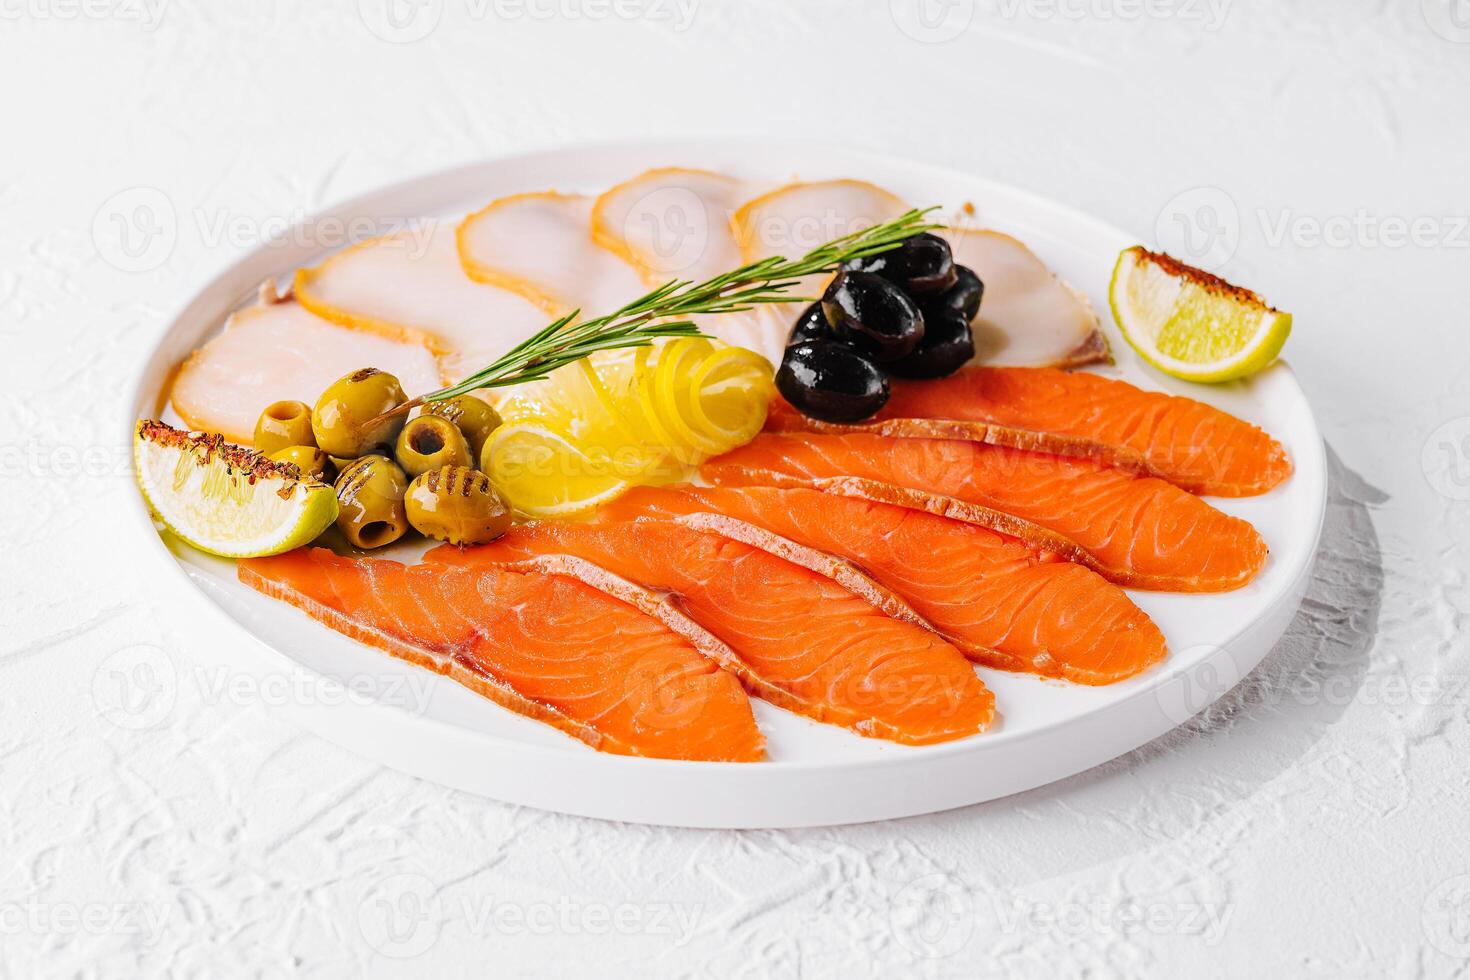 salmon, white fish and olives on plate photo